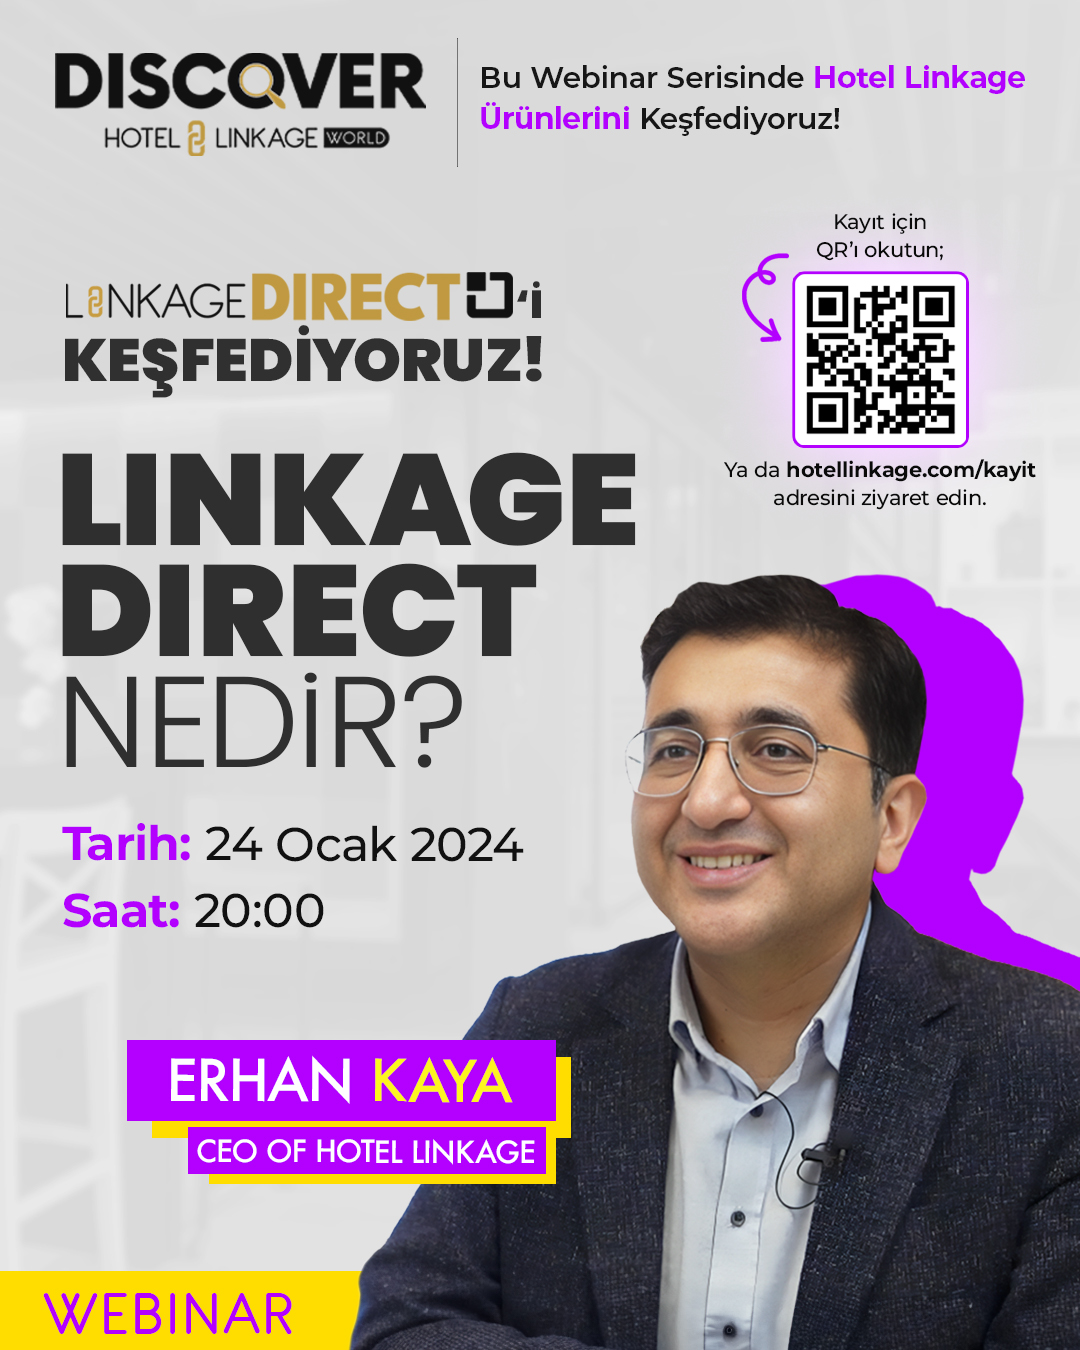 Promotional poster for the 'Discover Hotel Linkage' webinar scheduled for January 24, 2024, at 8:00 PM. The poster features a photo of Erhan Kaya, CEO of Hotel Linkage, along with the event title 'WHAT IS LINKAGE DIRECT?', registration information, and a QR code.